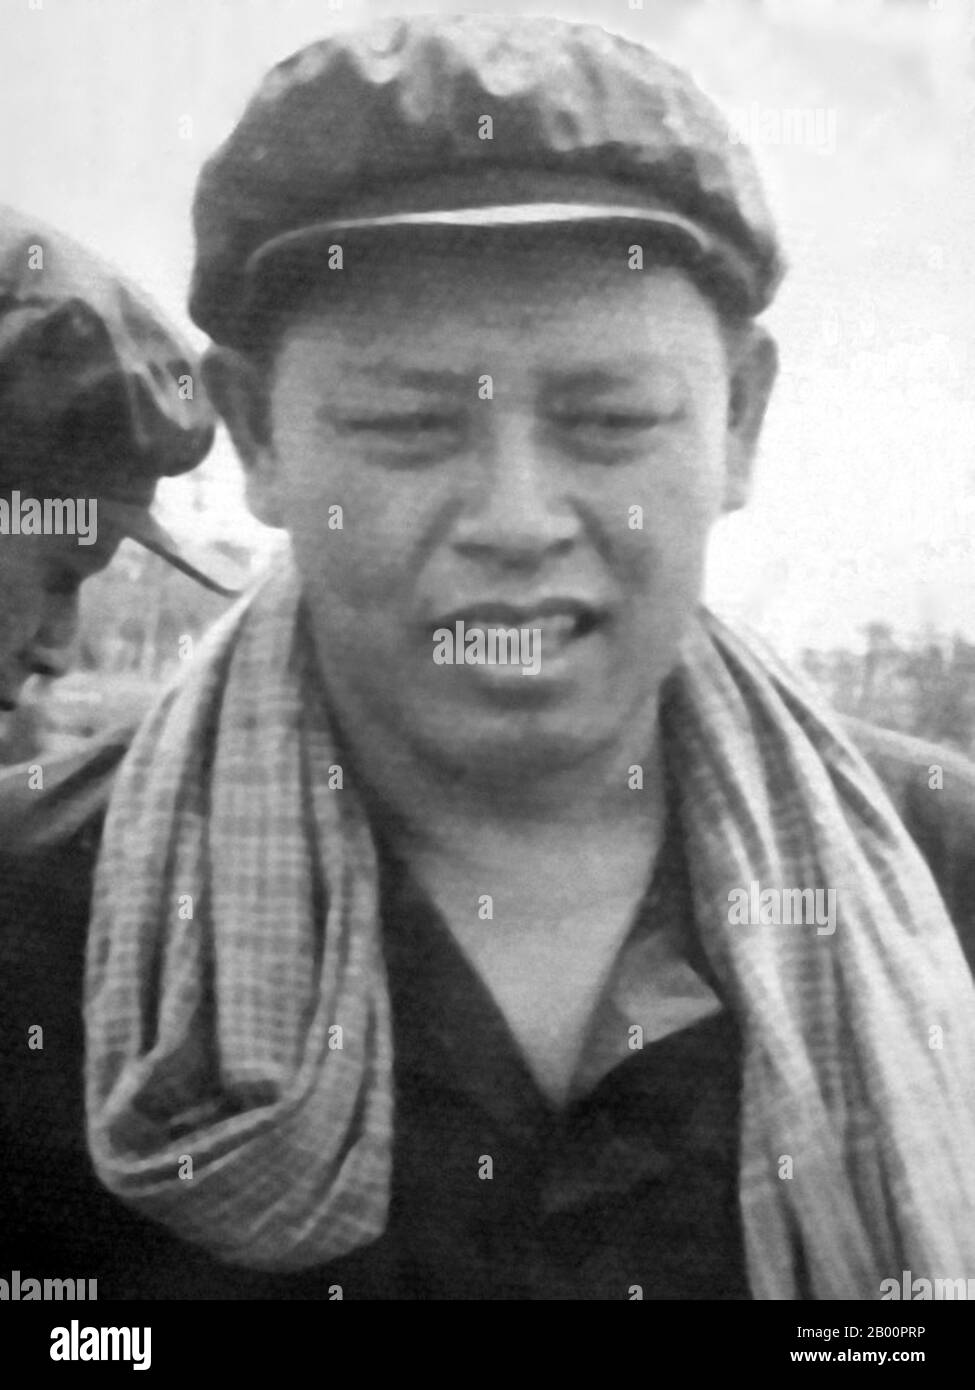 Cambodia: Ieng Sary, Khmer Rouge 'Brother No 3', during the Democratic Period, 1975-79.  Ieng Sary, Khmer Rouge 'Brother No 3', was born Kim Trang in Tra Vinh Province, Vietnam, in 1924. He was Deputy Prime Minister and Foreign Minister of Democratic Kampuchea from 1975 to 1979 and held several senior positions in the Khmer Rouge until his defection in 1996. He is married to Ieng Thirith, former Khmer Rouge Social Affairs Minister. Stock Photo